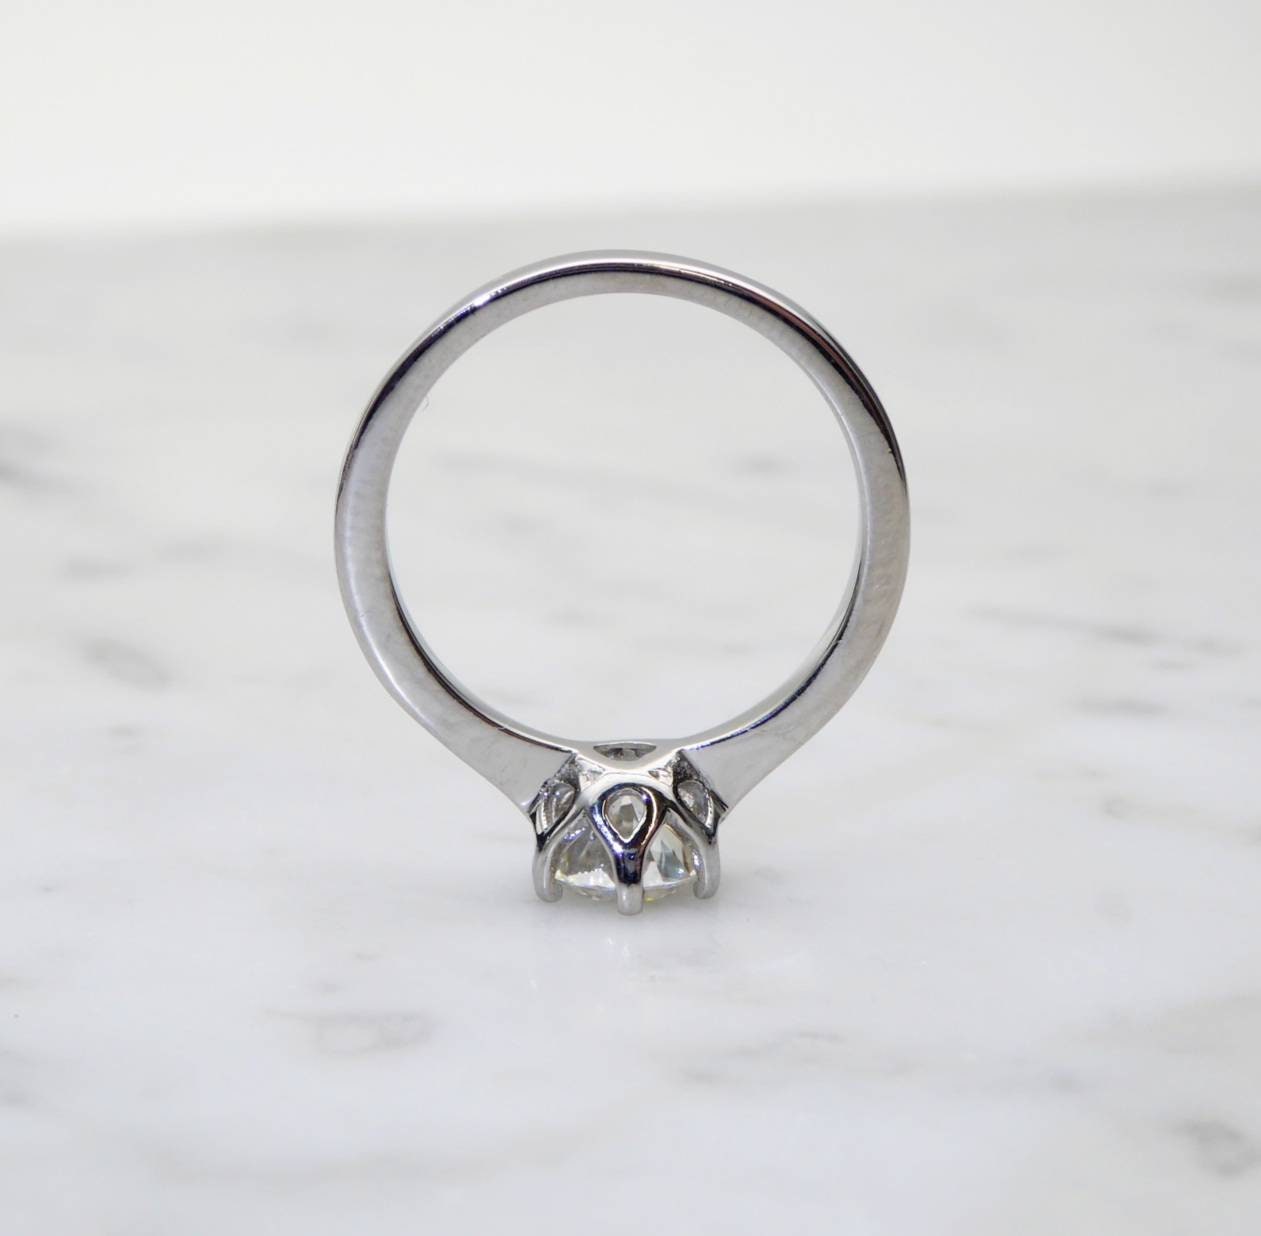 1ct Moissanite Solitaire ring available in white gold or titanium - engagement ring - hand made